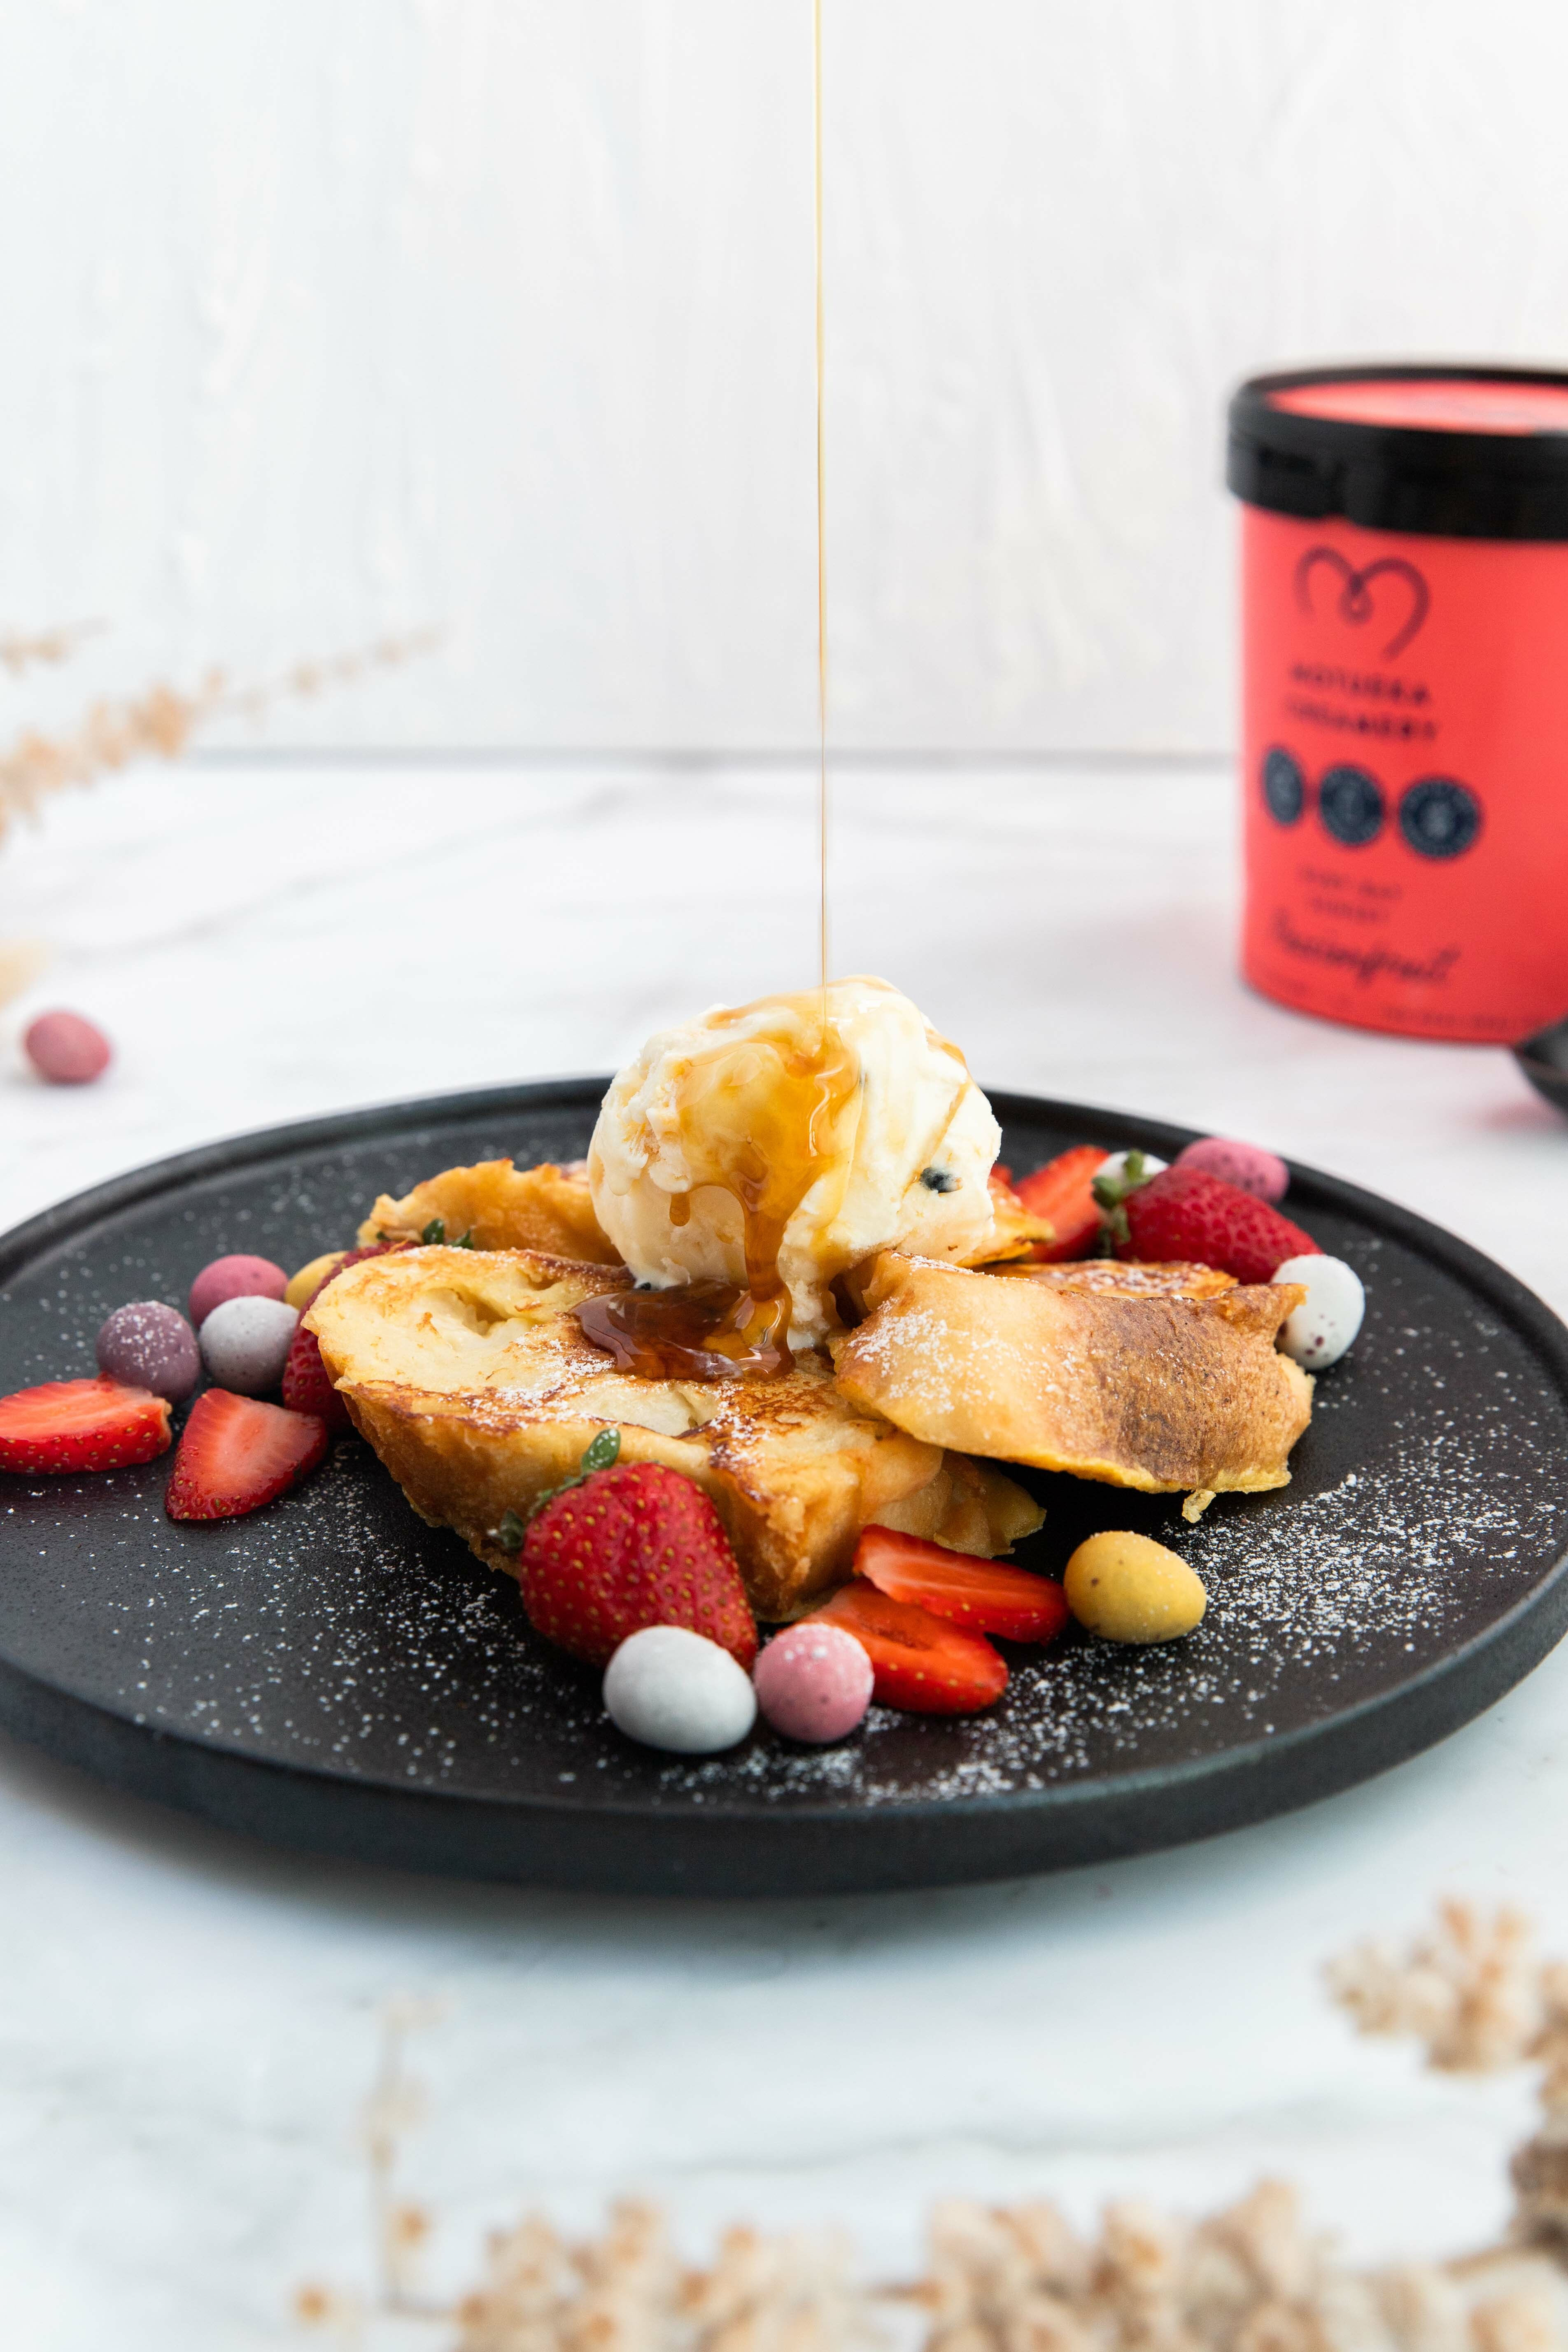 Cardamom French Toast with Passionfruit Icecream & Berries